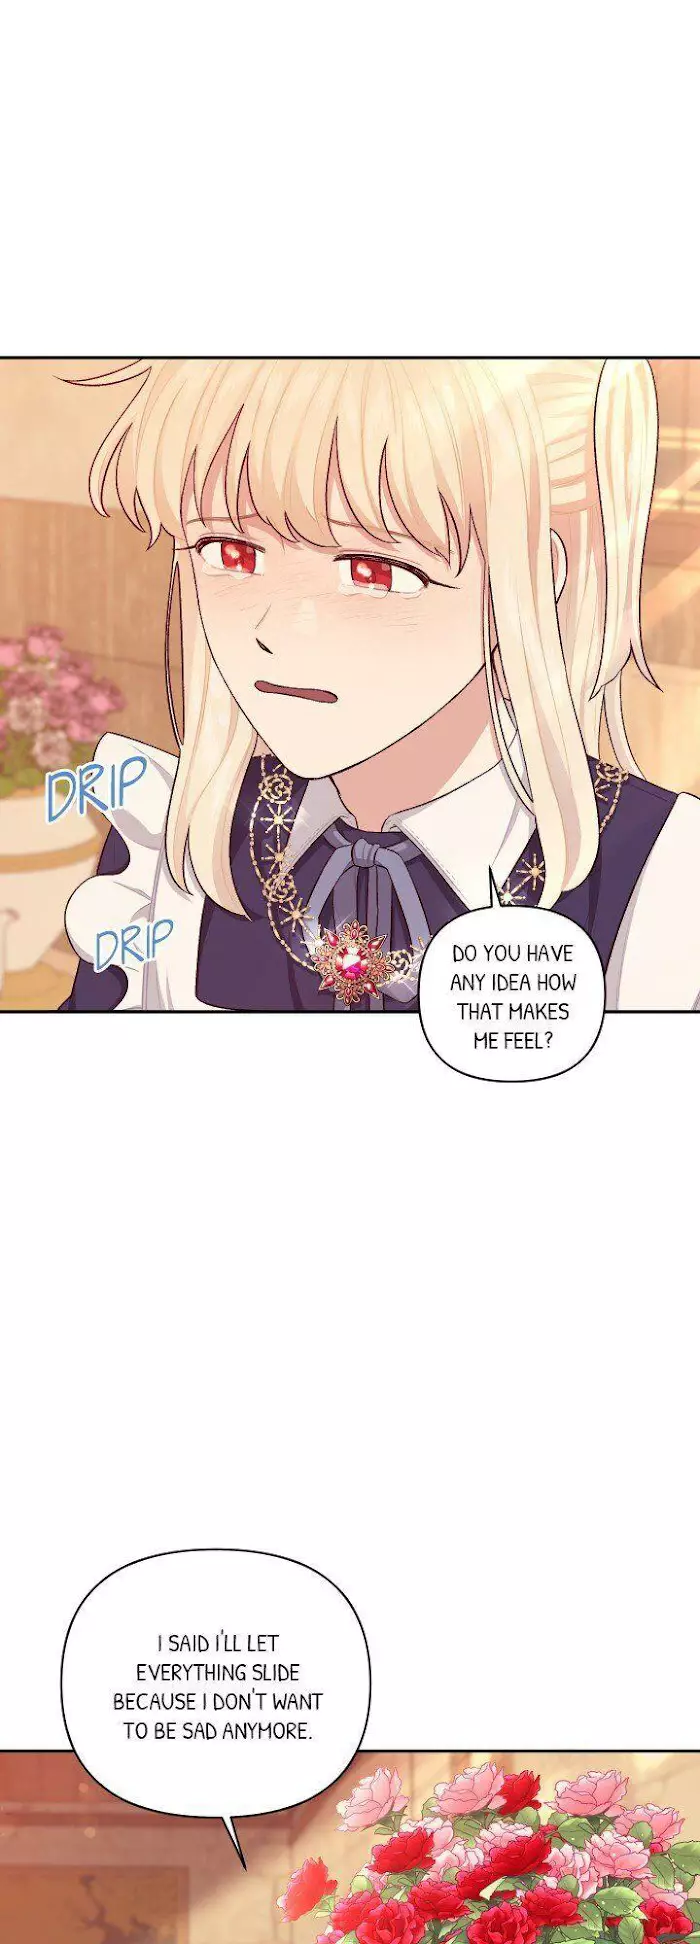 I Became A Maid In A Tl Novel - 60 page 45-5556b714